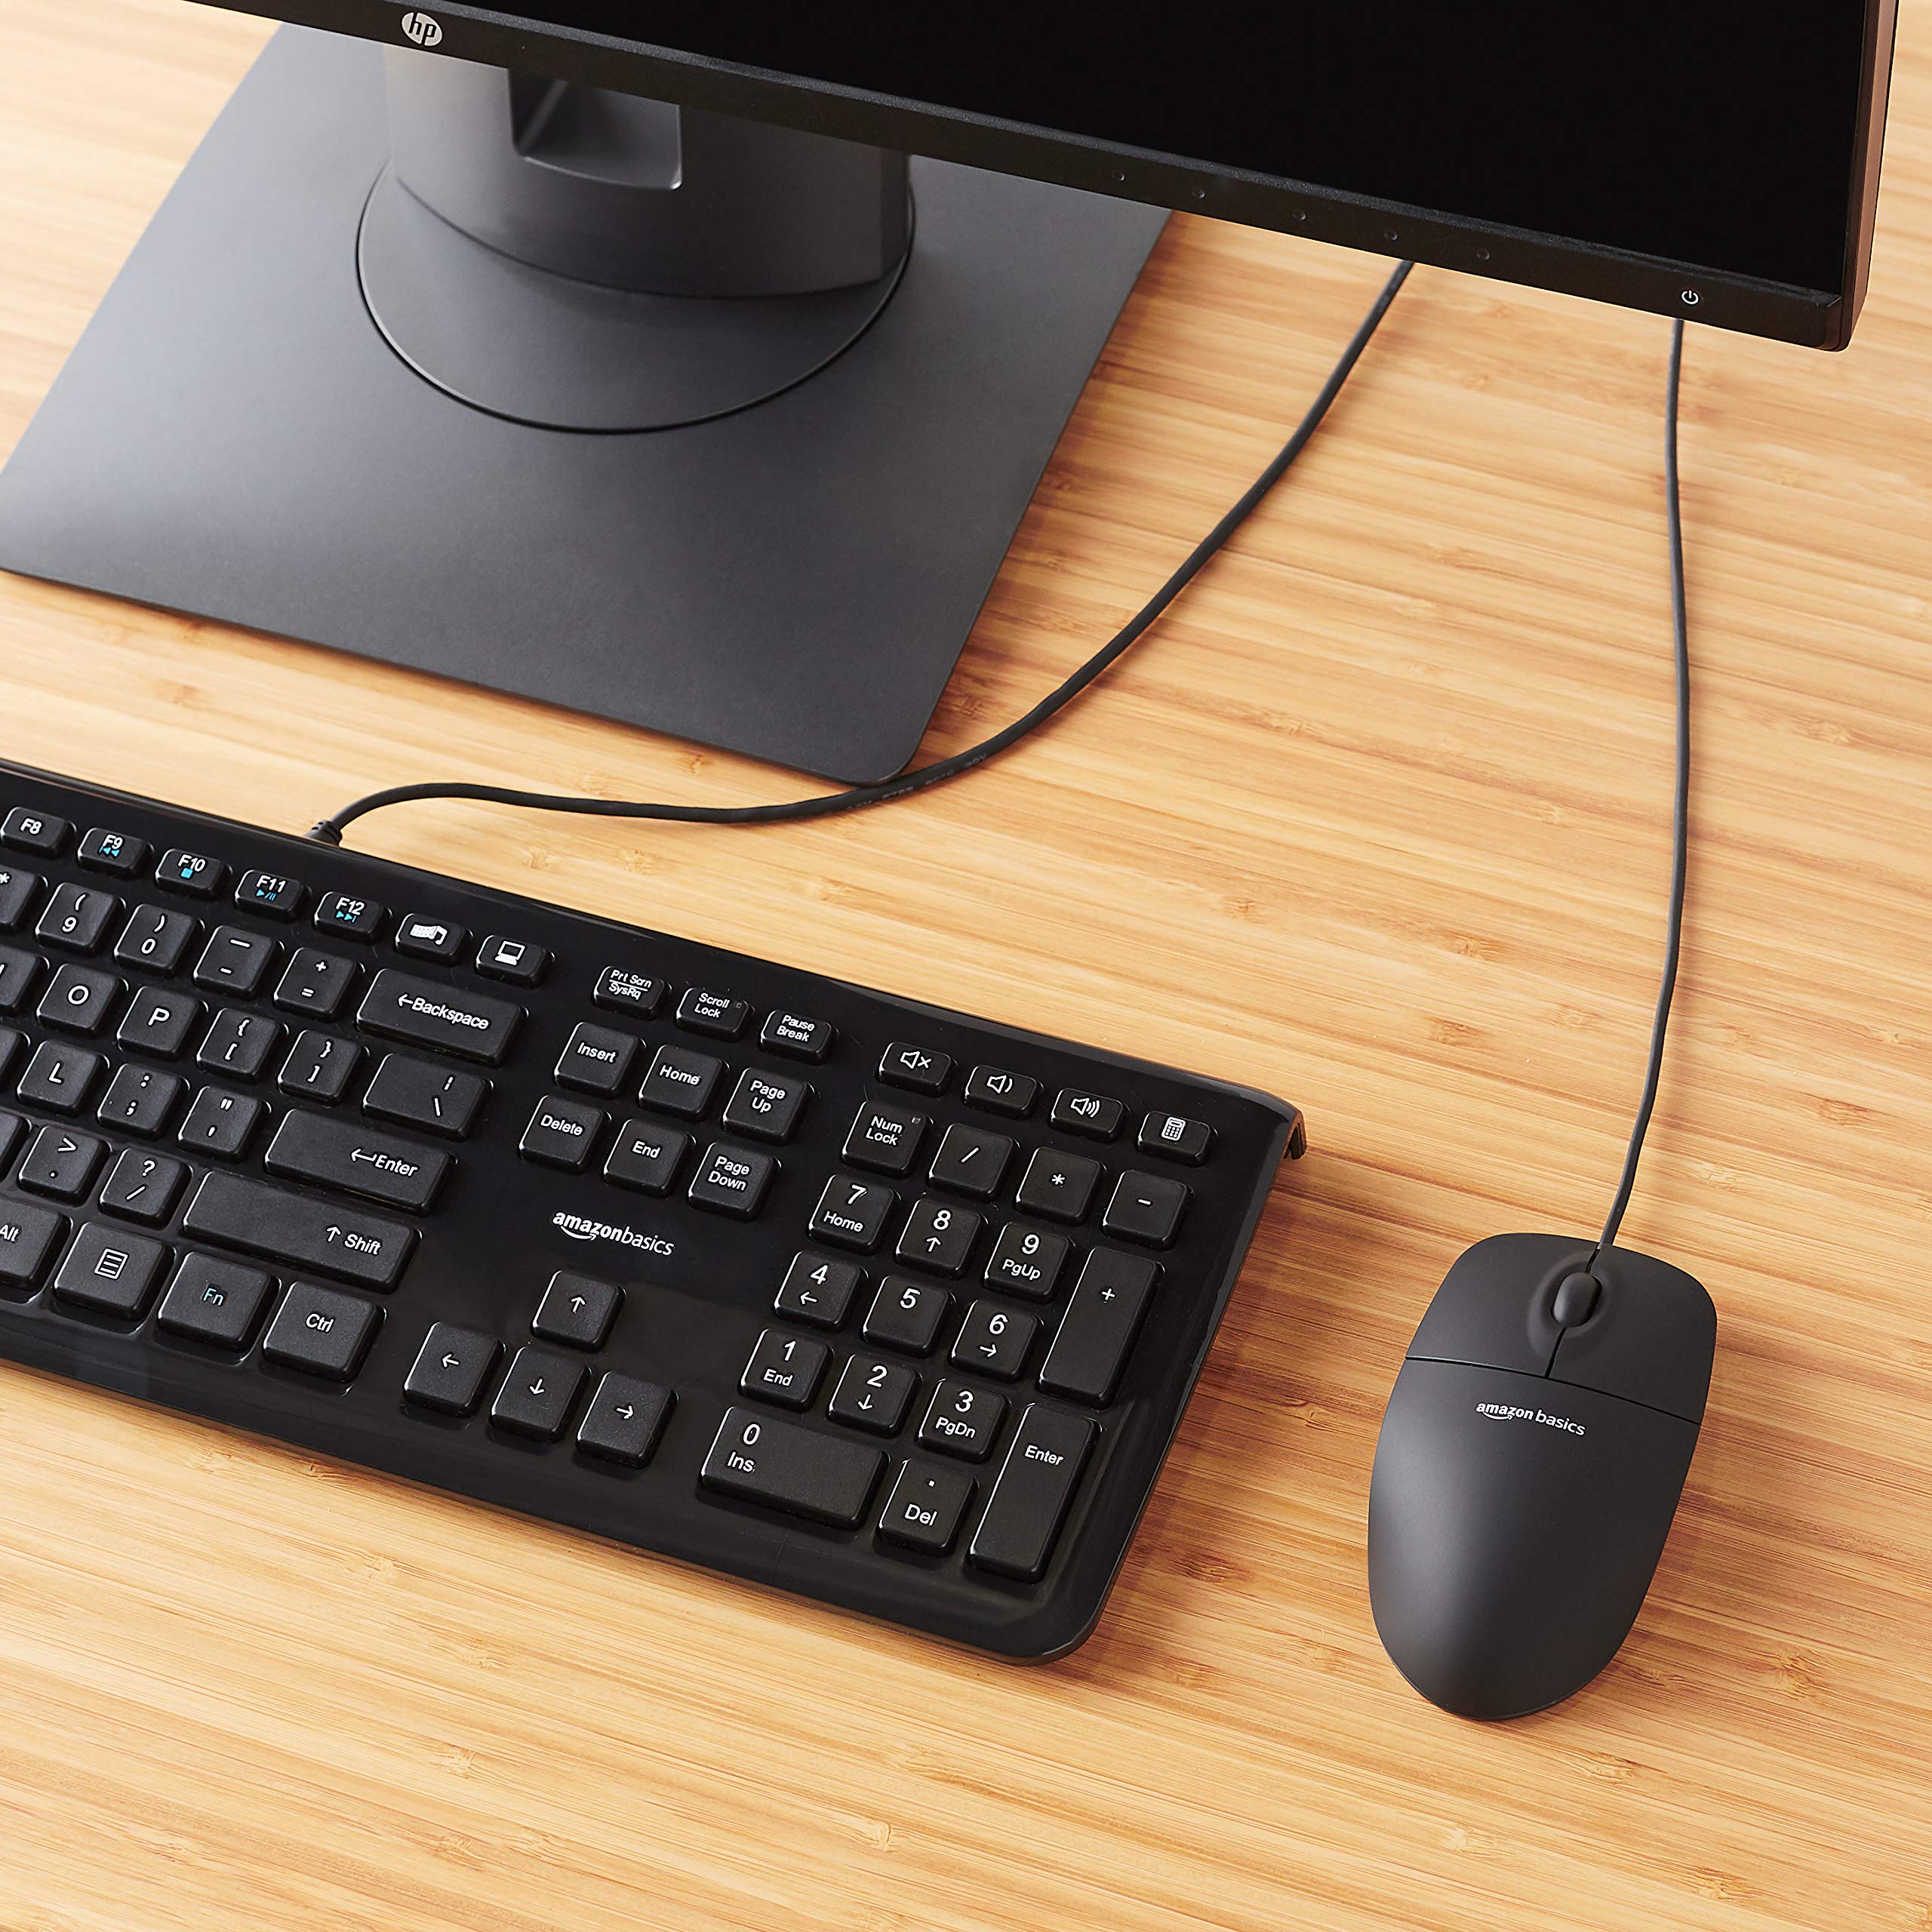 Look for your wireless mouse listed under this category.
If there is a yellow exclamation mark or a red "X" next to your mouse, it indicates a driver issue.